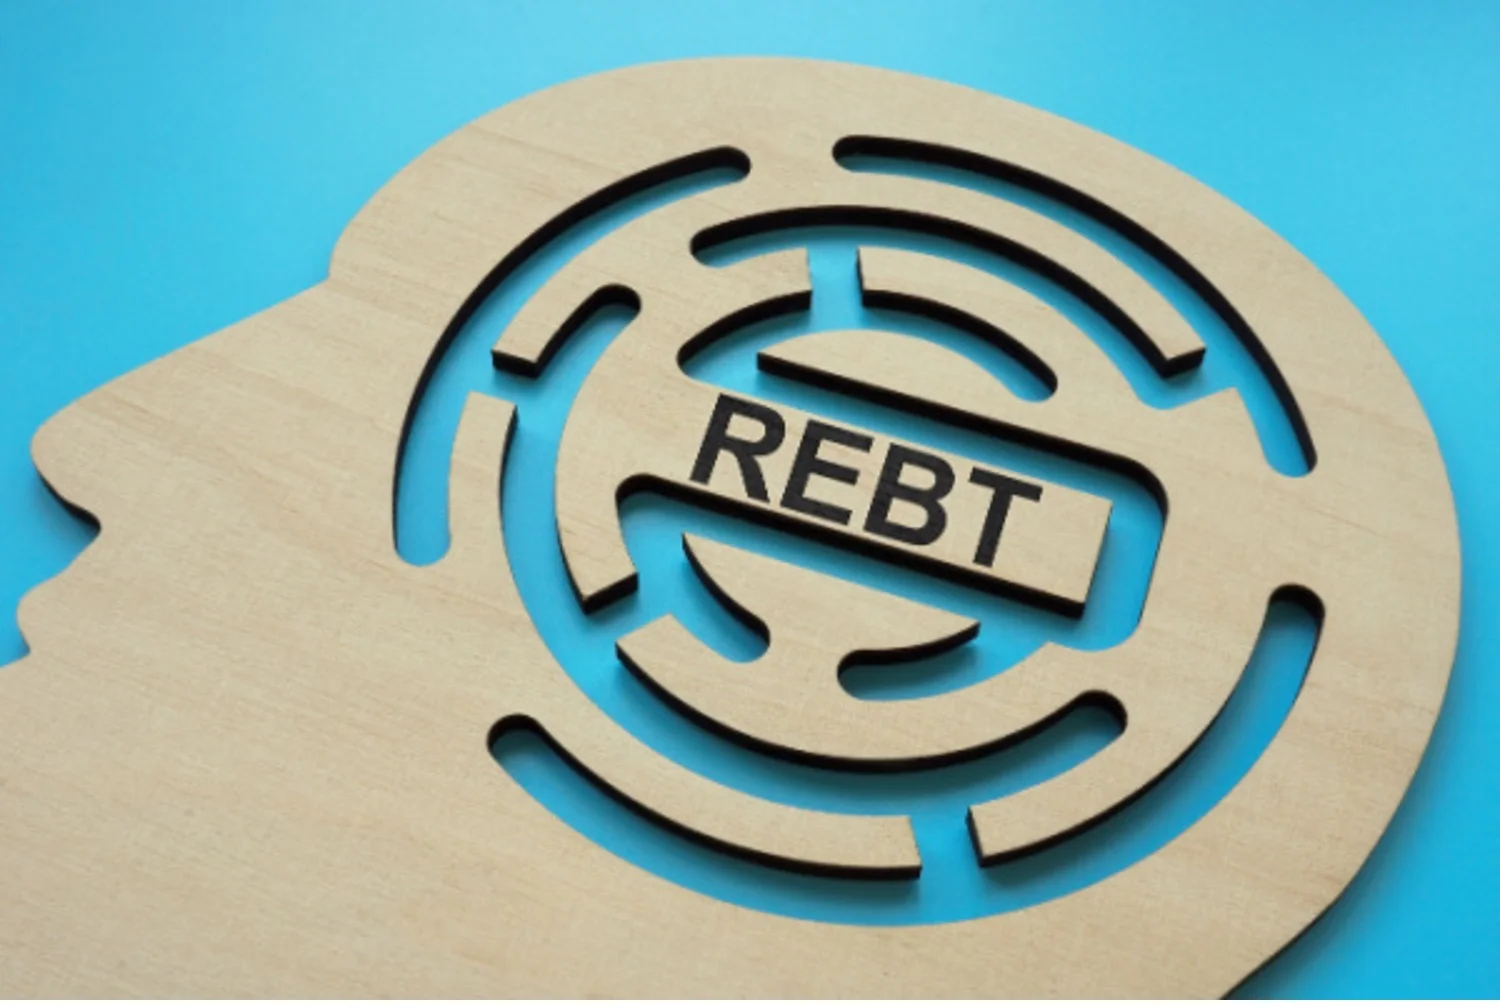 Wooden cutout of face silhouette with maze and letters “REBT” carved in the center